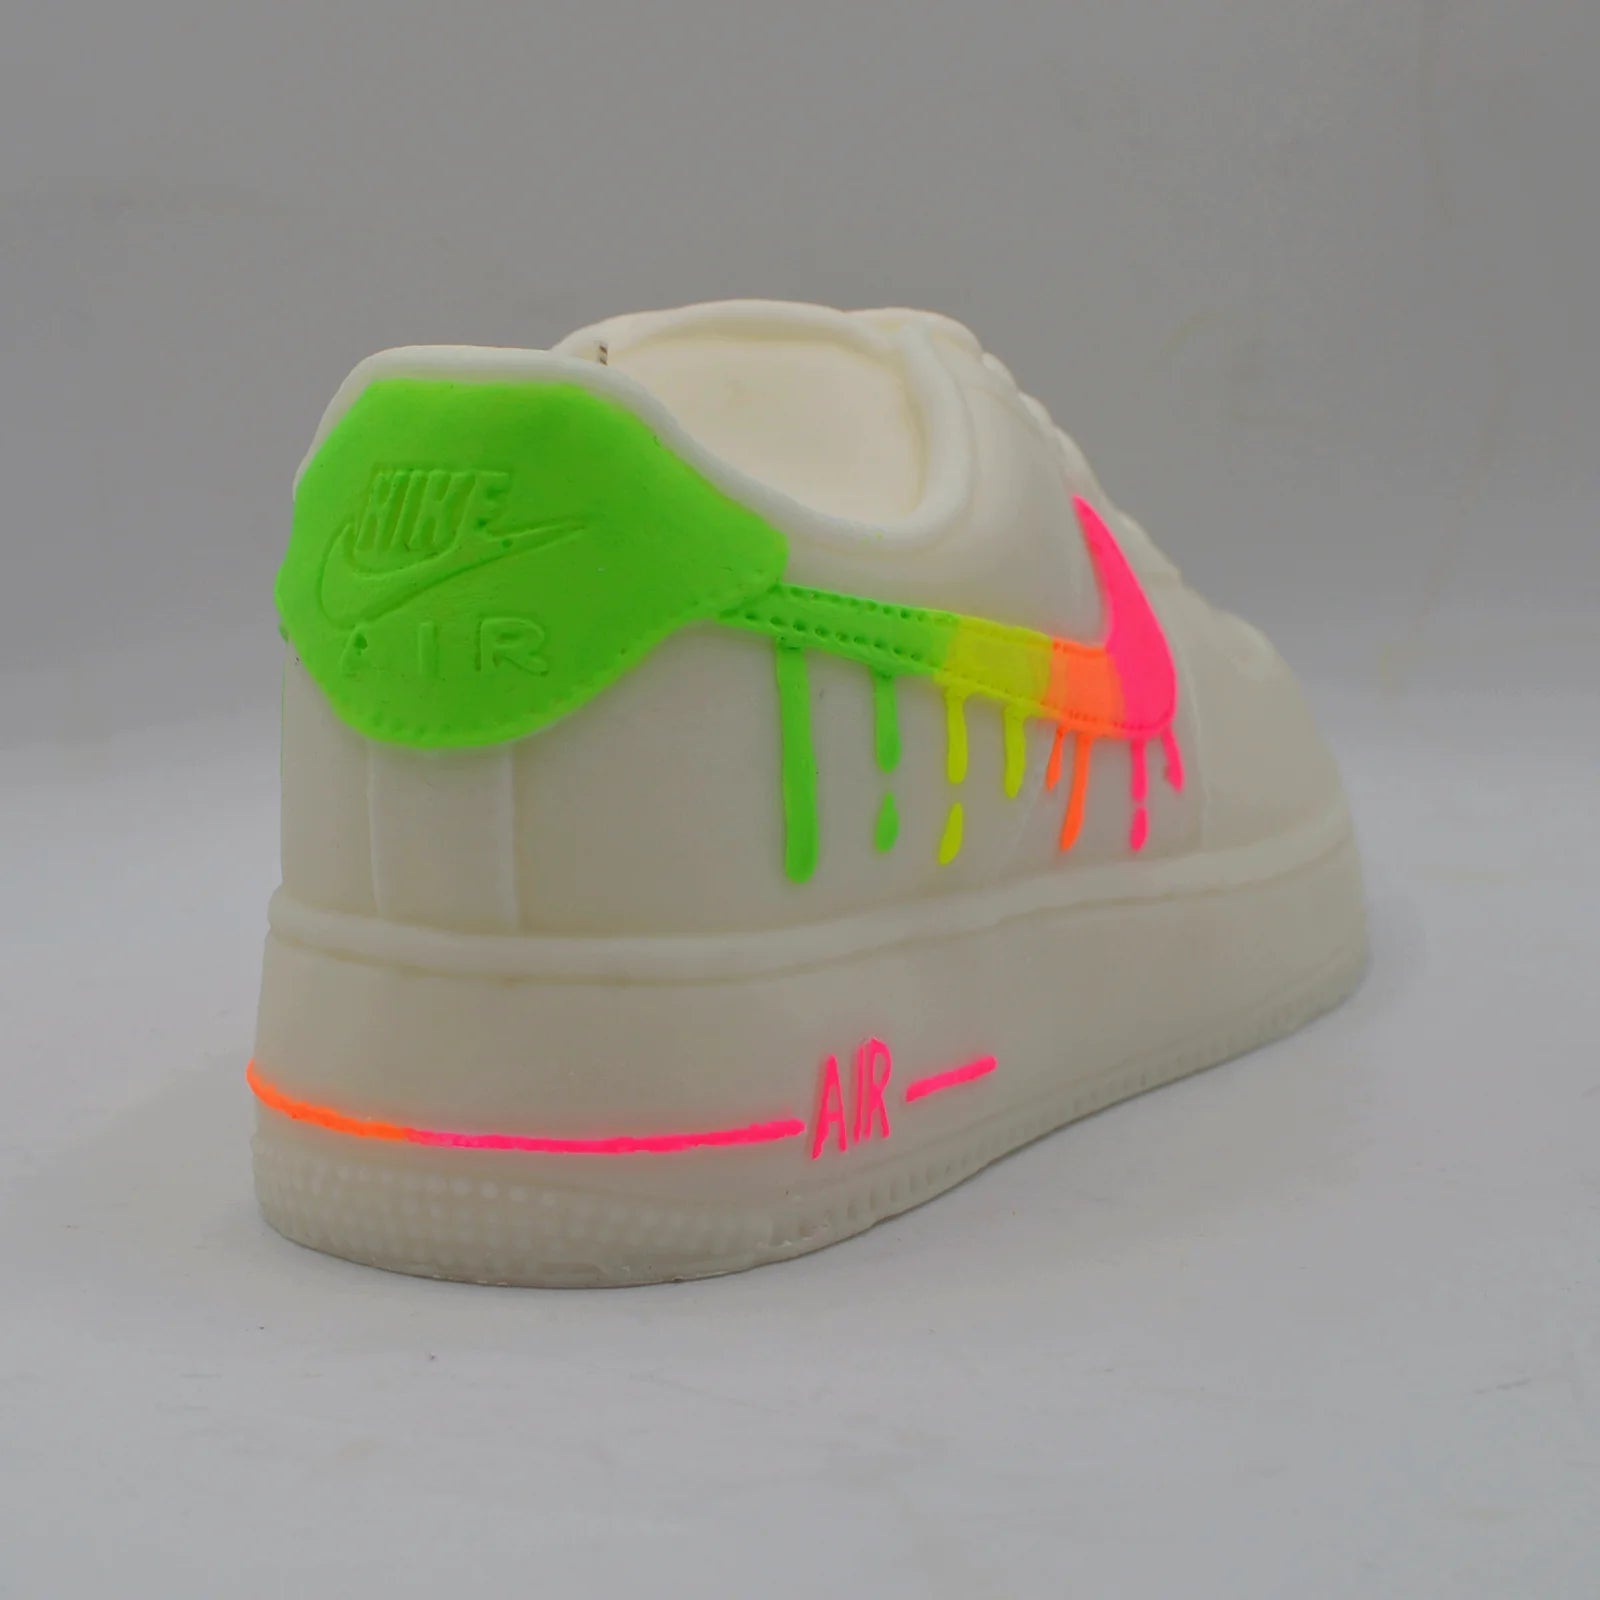 Totally Don't Drip Low Top Candle - White/Neon